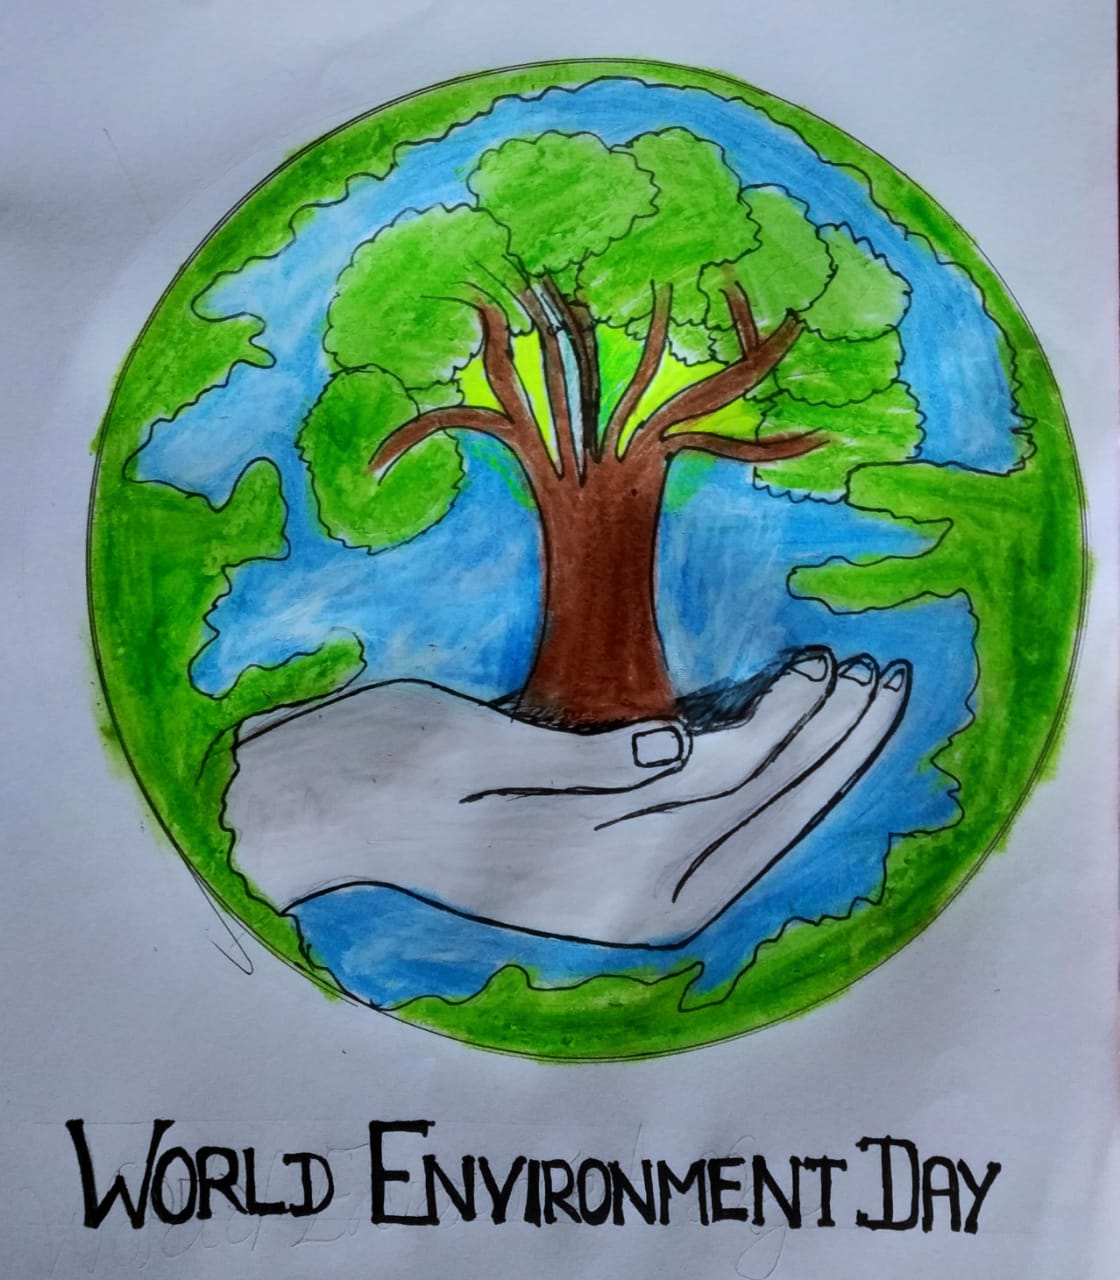 Drawing World Environment Day Poster | Earth Day Poster Drawing | Subodh  Arts | | Poster drawing, Earth drawings, World environment day posters